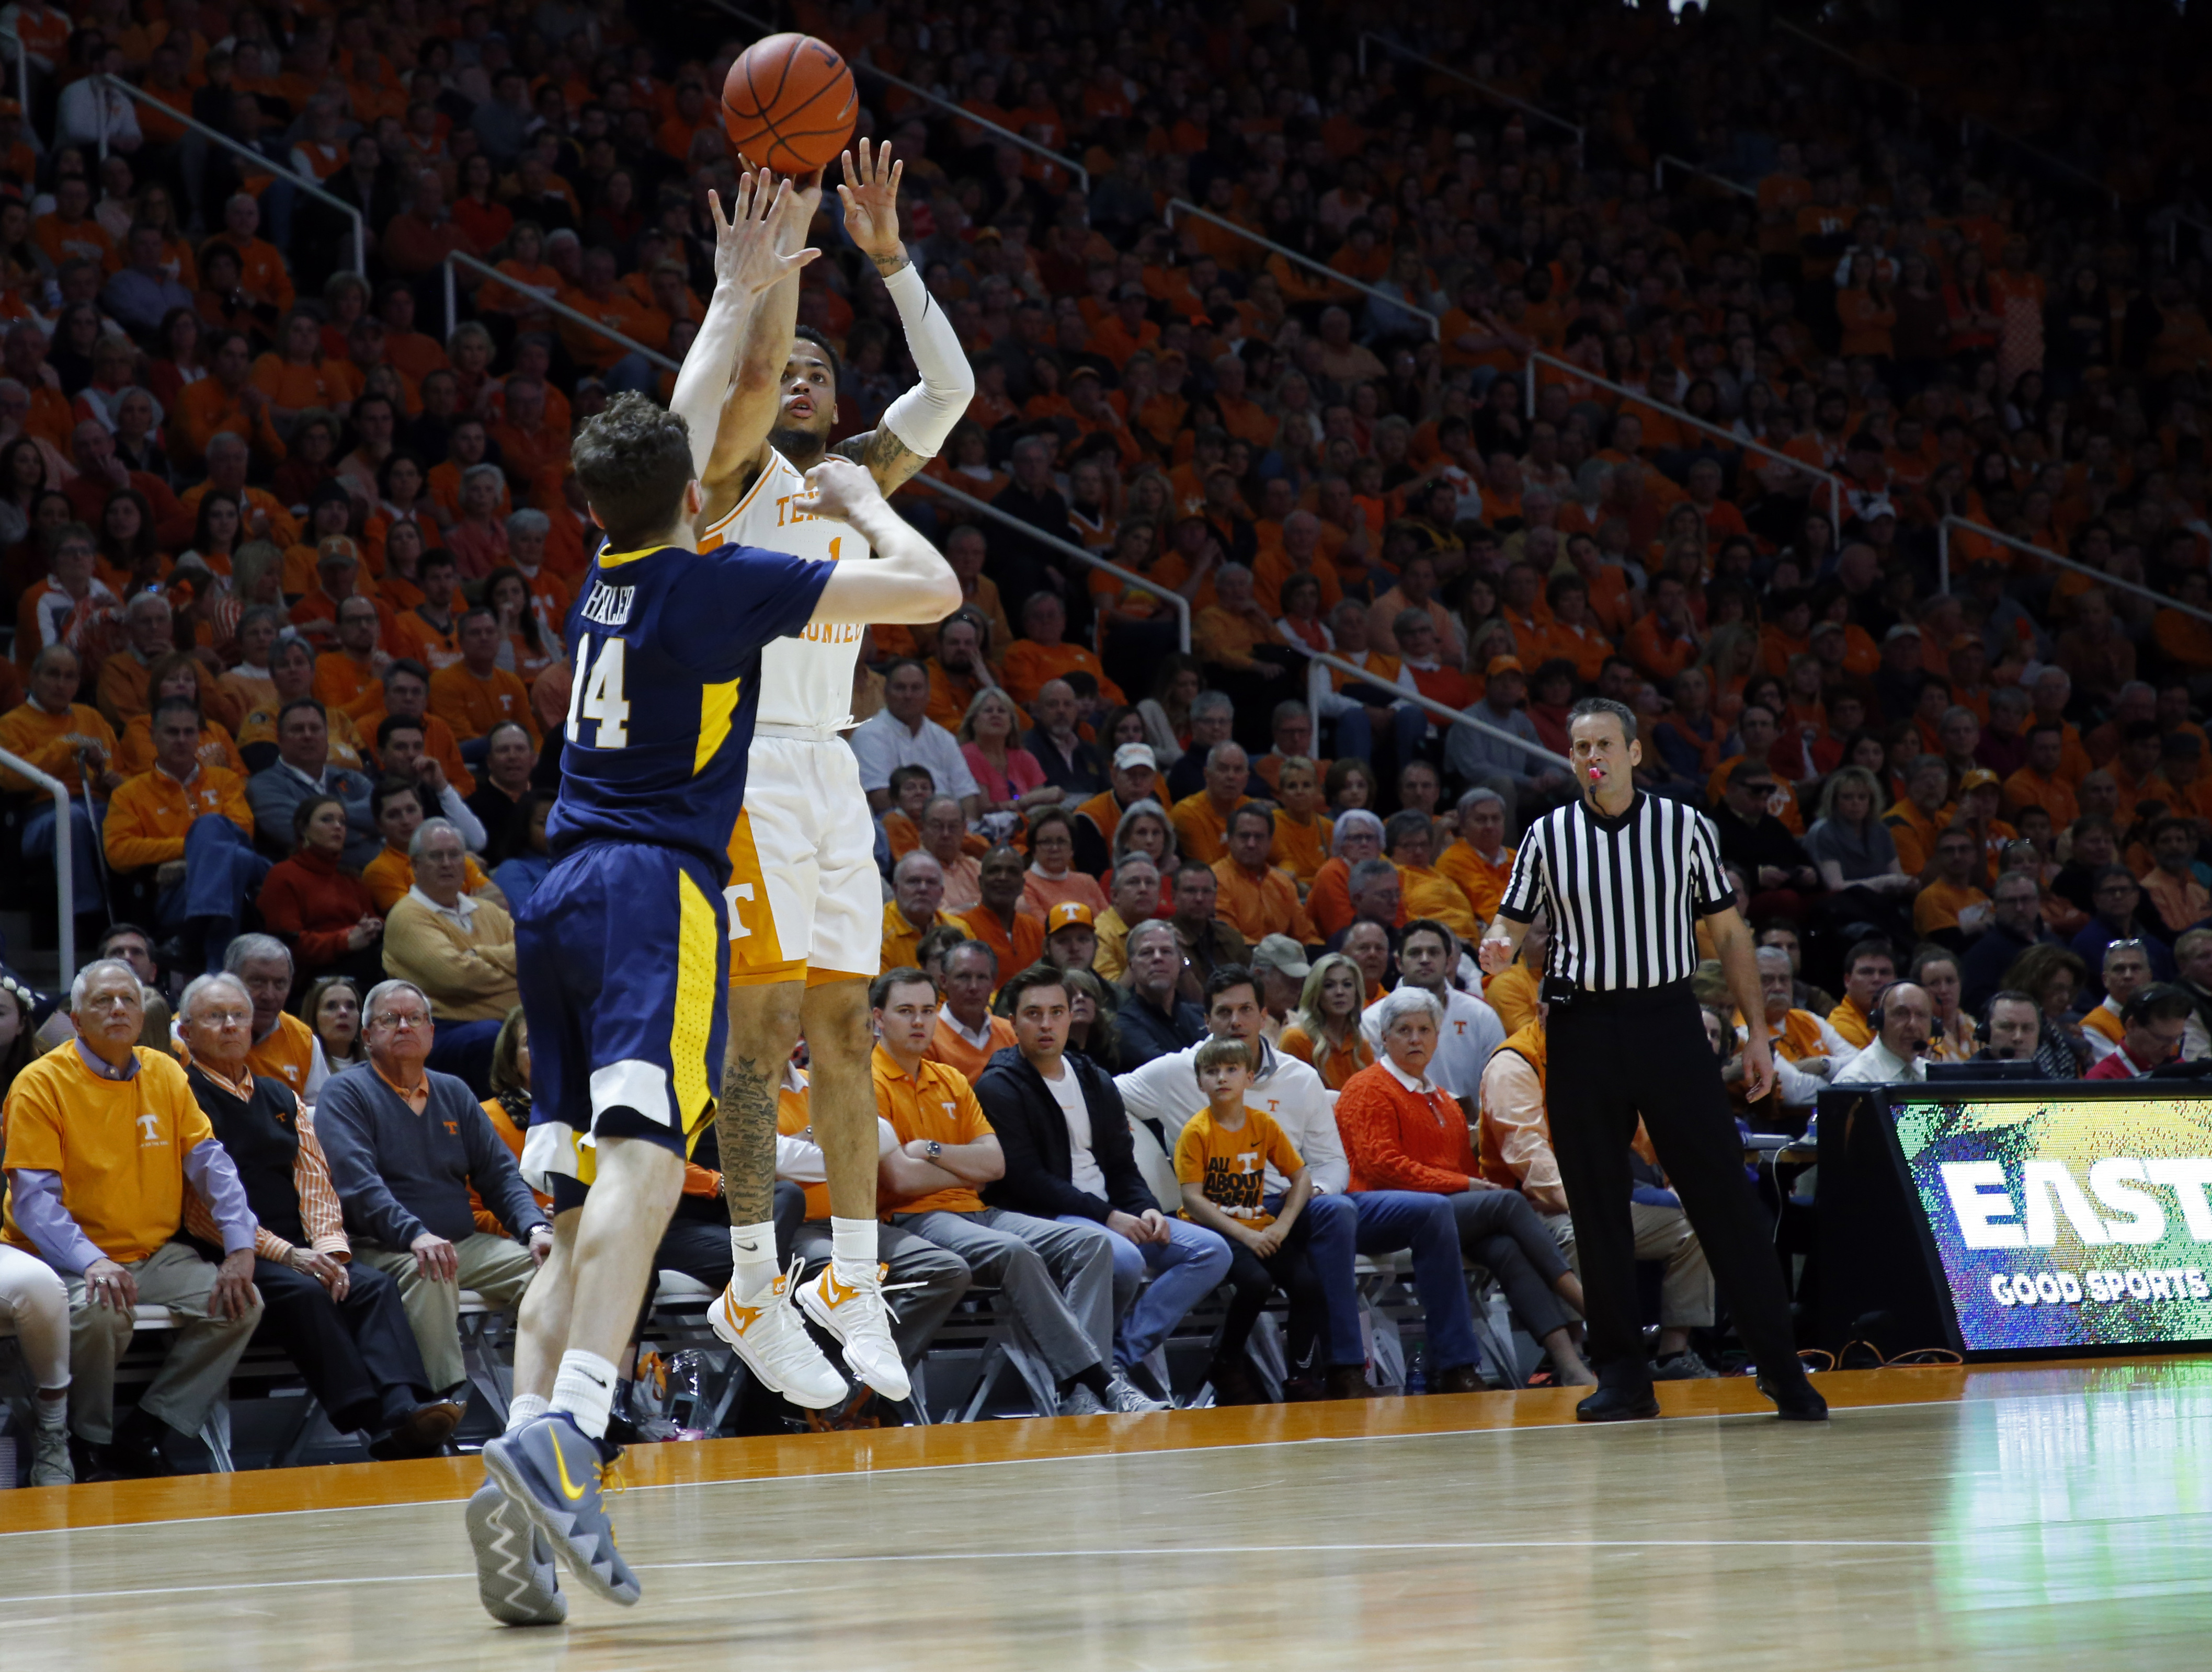 No. 1 Vols beat West Virginia 83-66 for 14th straight win